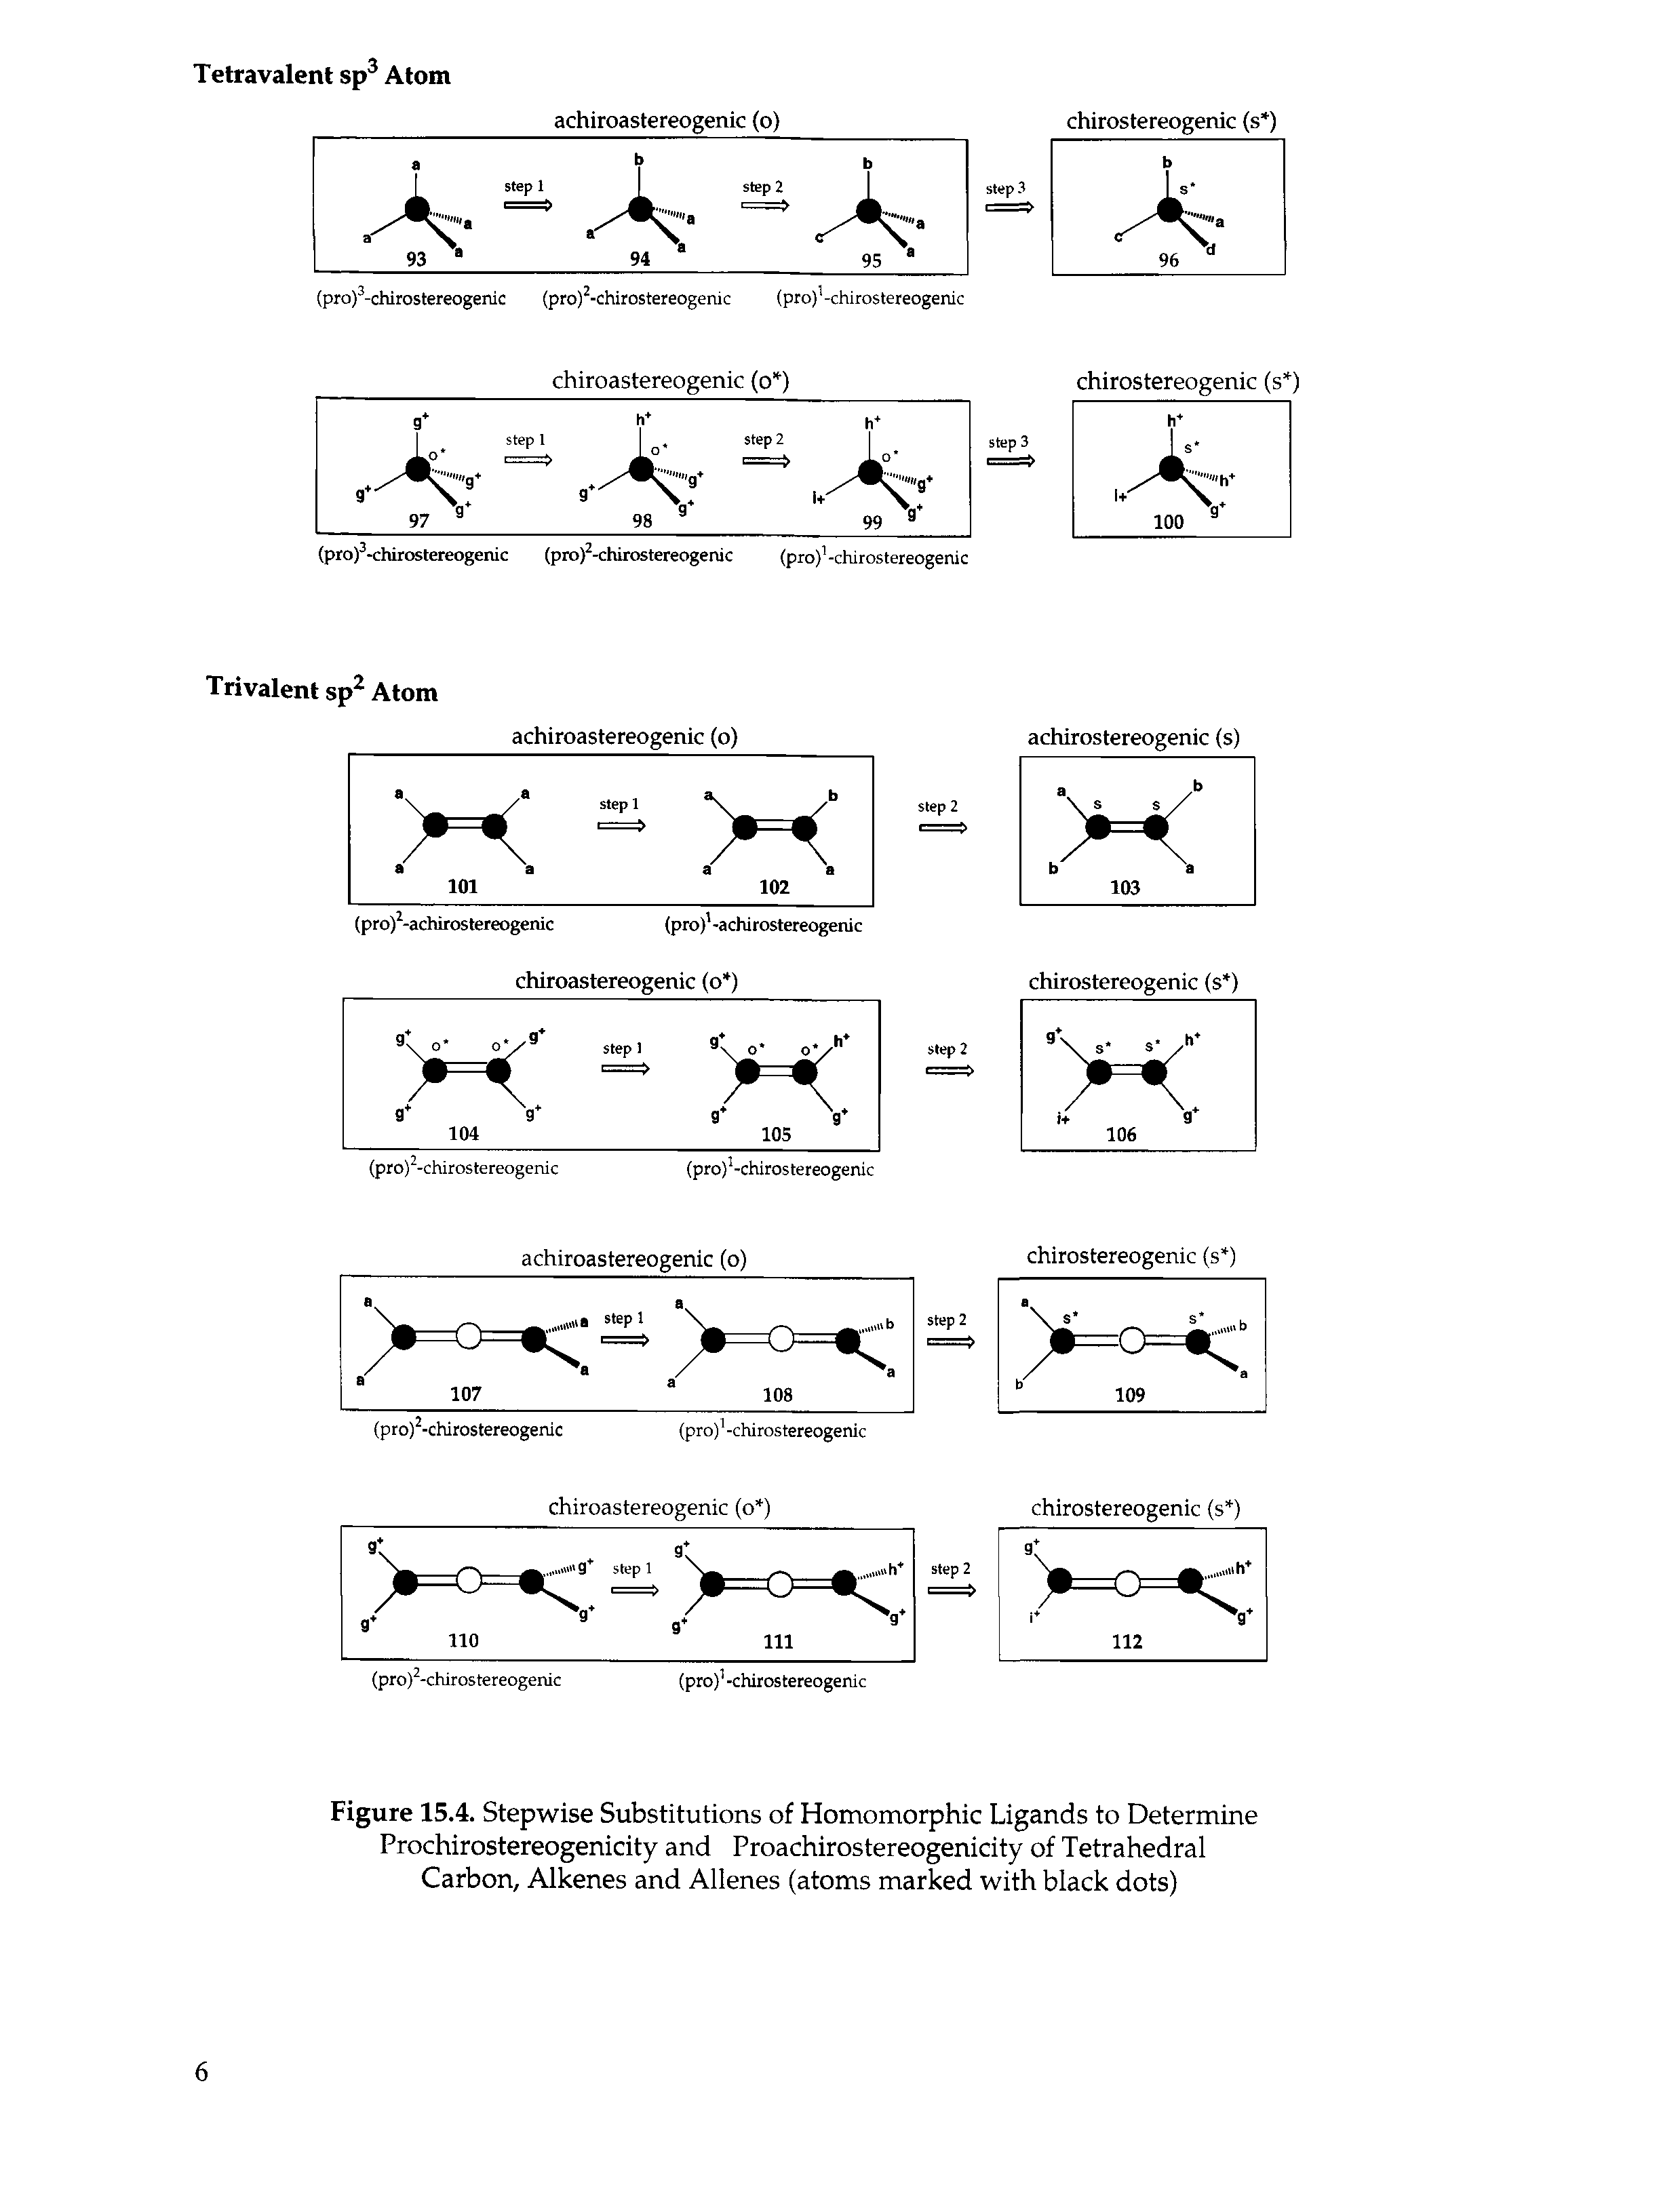 Figure 15.4. Stepwise Substitutions of Homomorphic Ligands to Determine Prochirostereogenicity and Proachirostereogenicity of Tetrahedral Carbon, Alkenes and Allenes (atoms marked with black dots)...